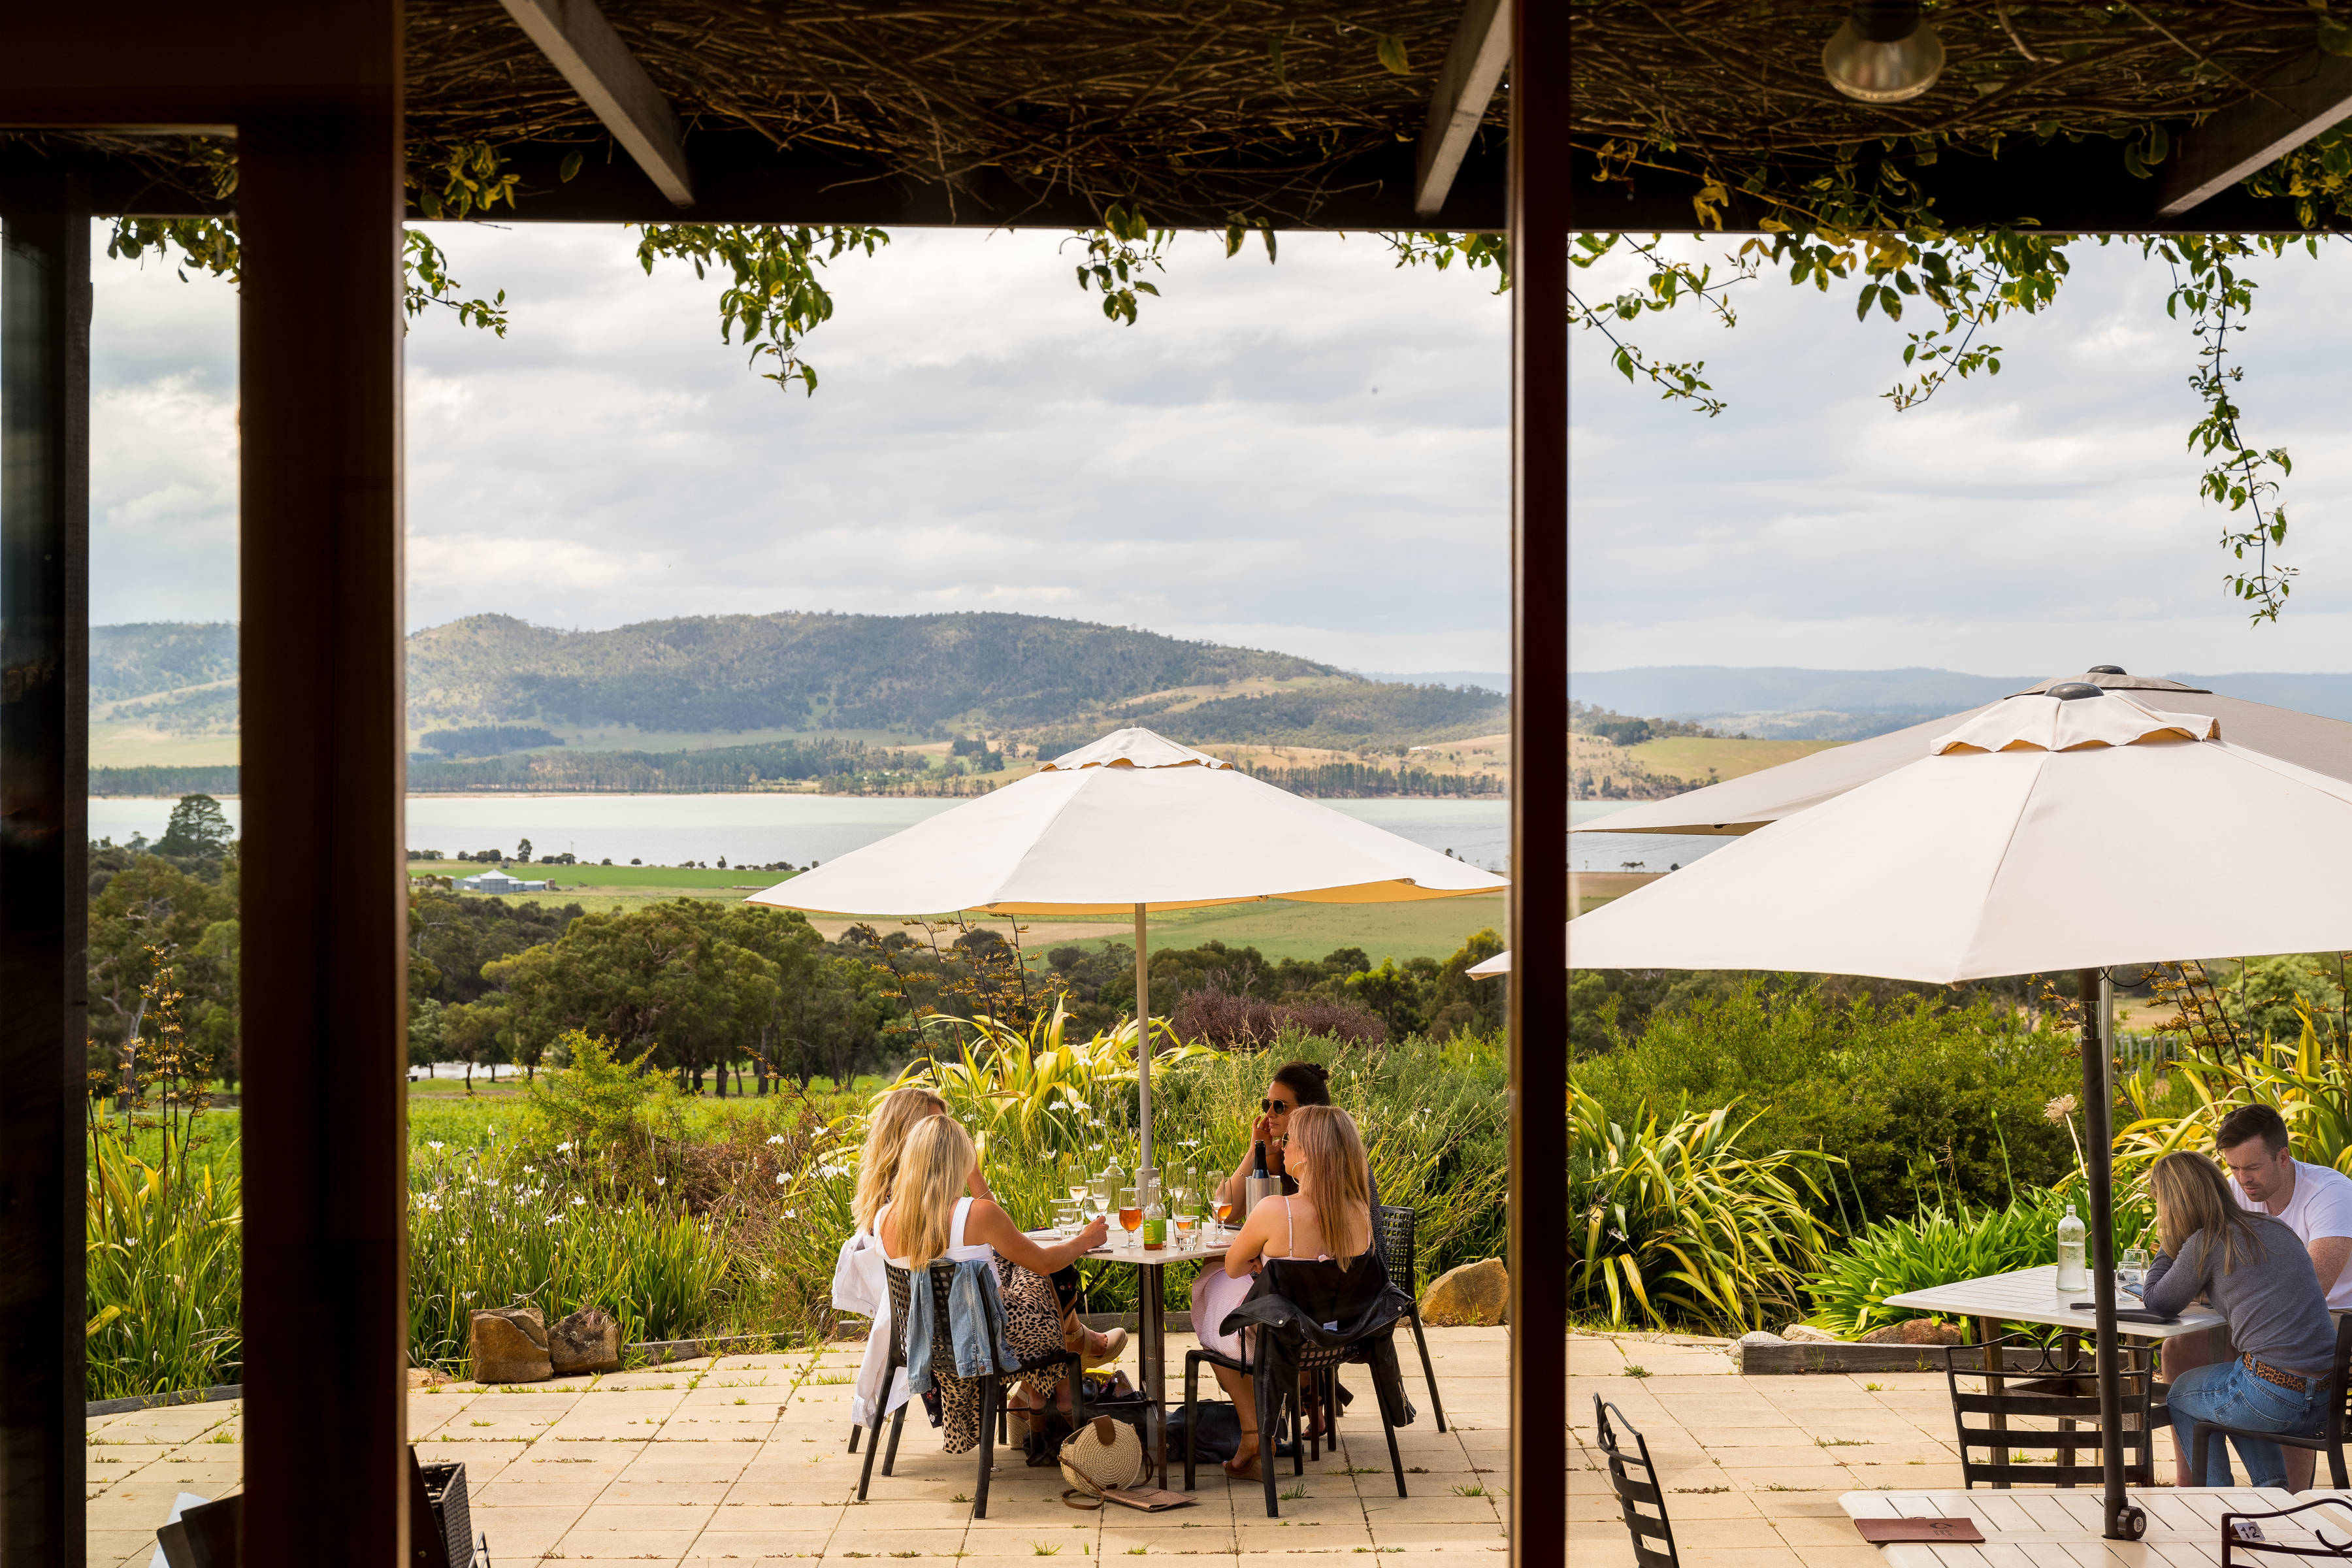 Guests seated at tables under umbrellas enjoying wine tasting on the Coal Valley Vineyard patio, overlooking Barilla Bay in the distance.